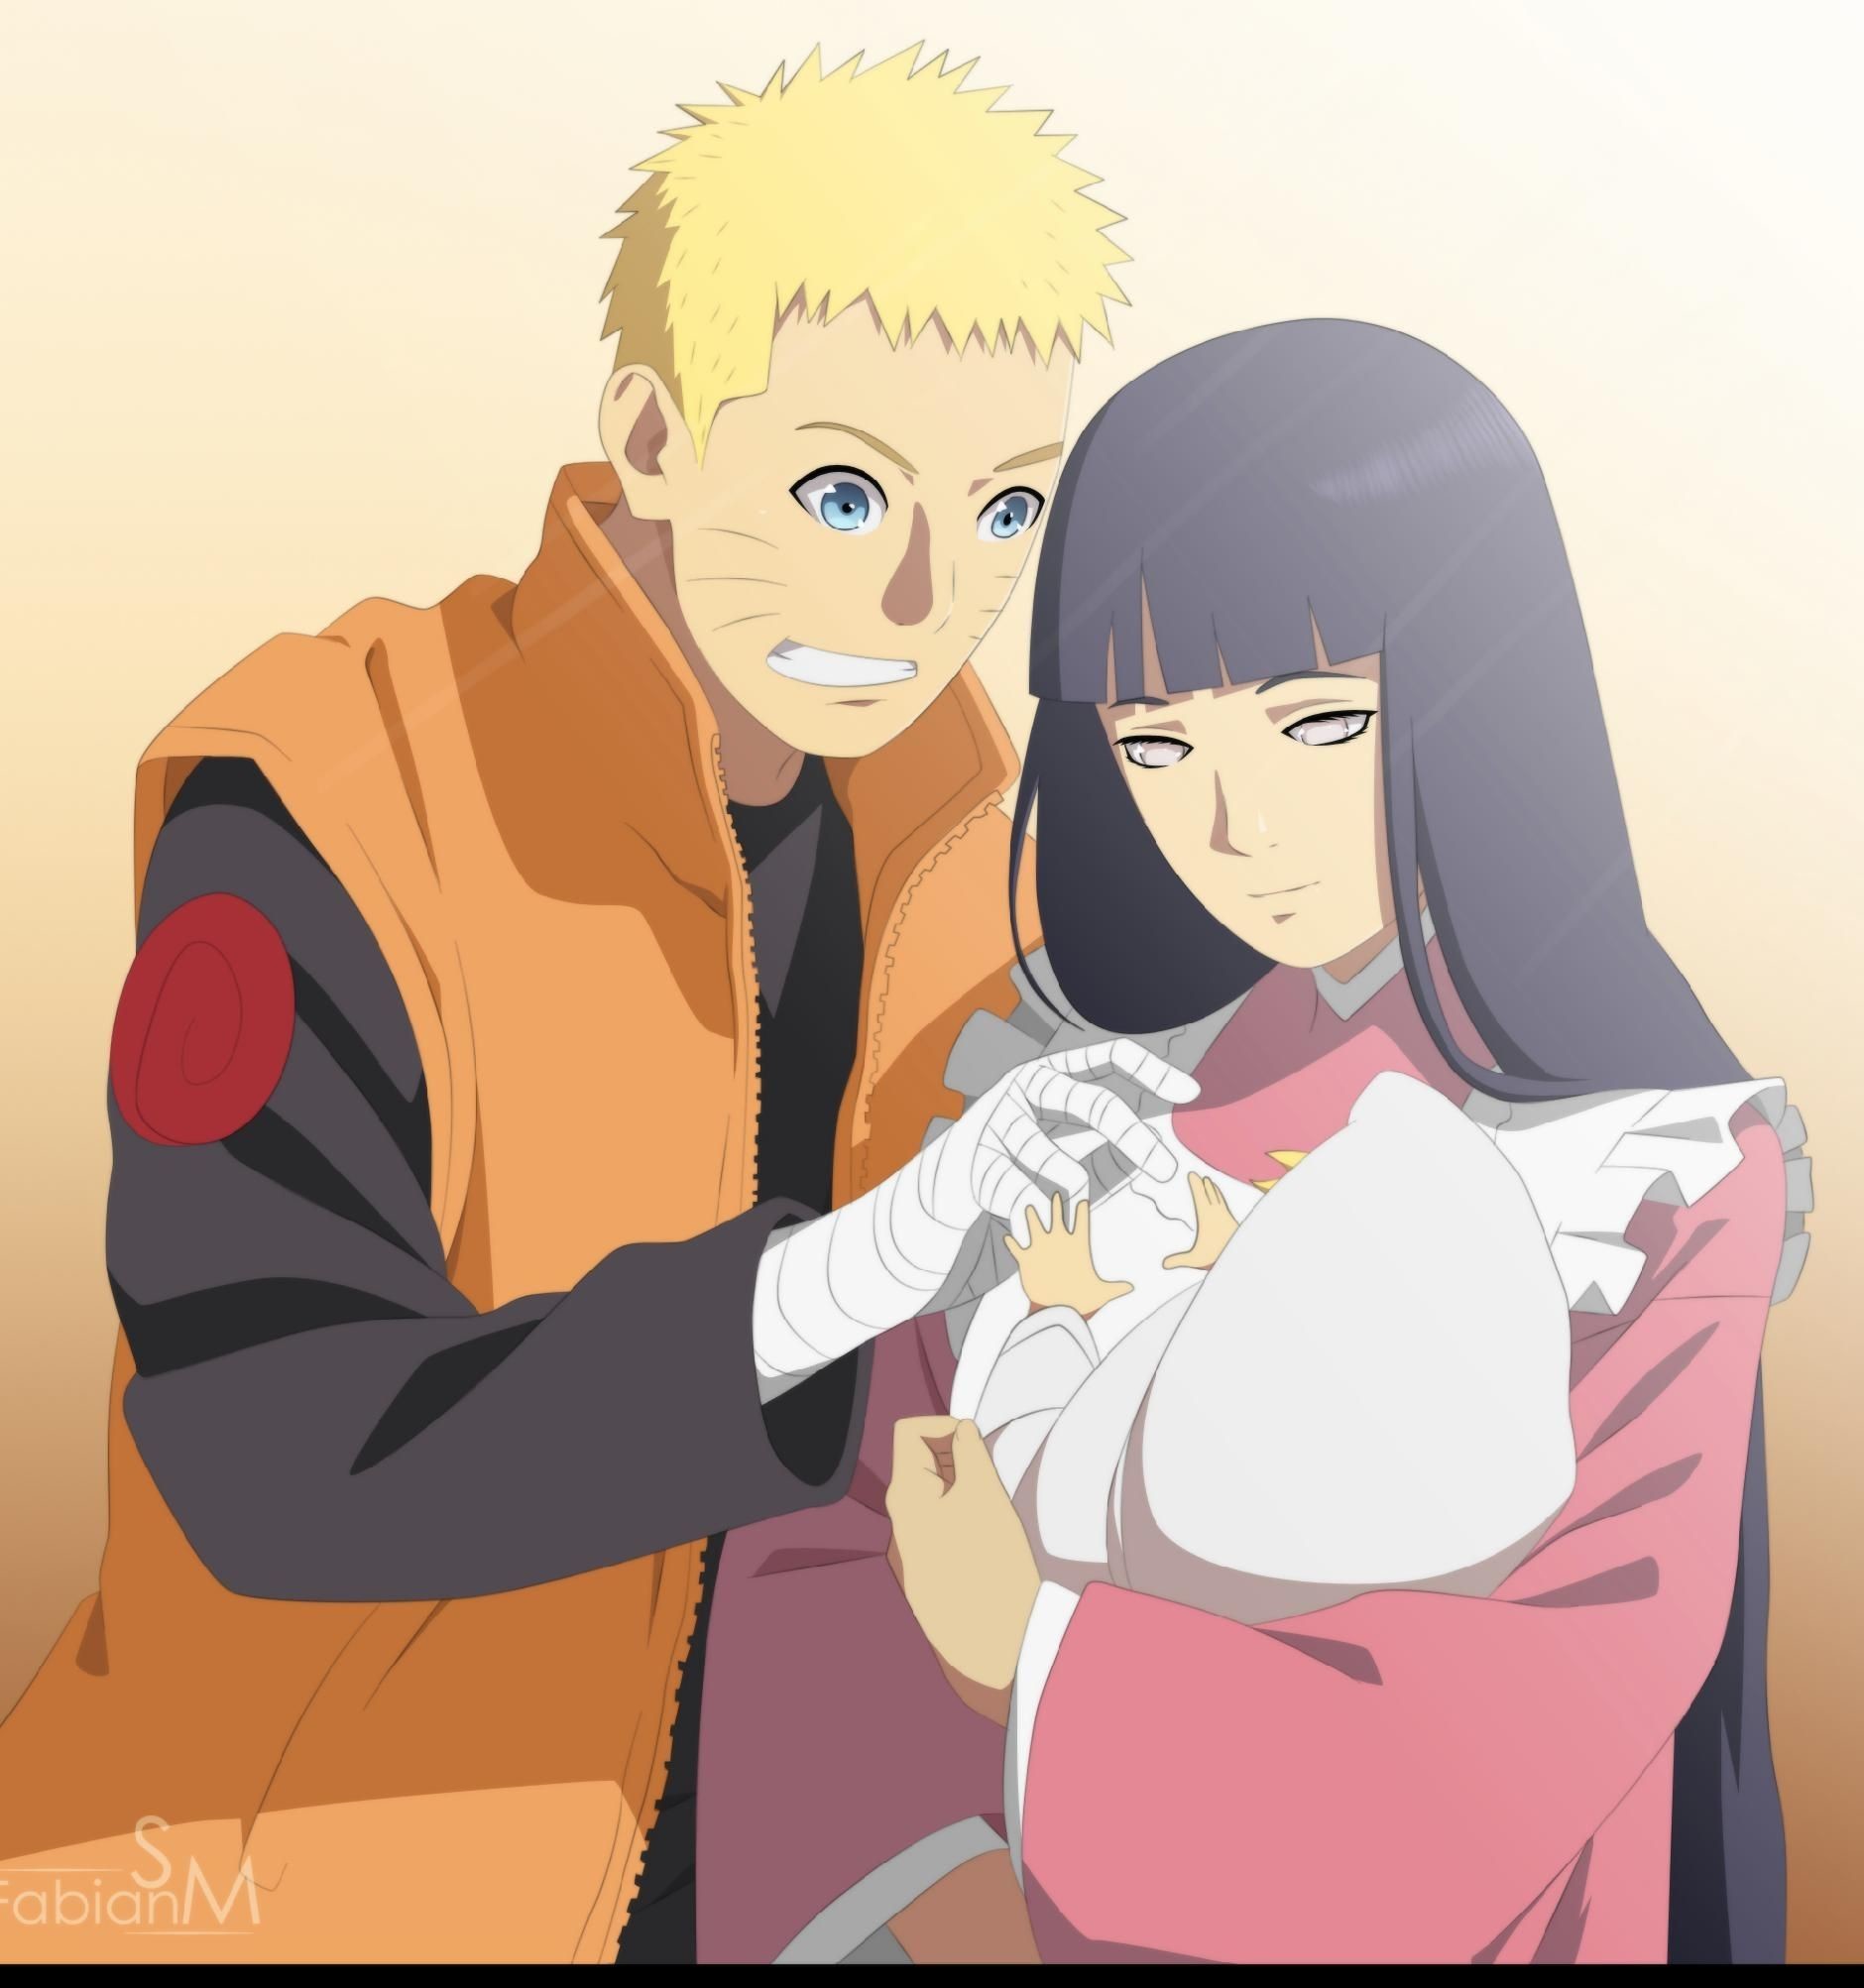 1880x2005 Naruto and Hinata Shippuden and Last Wallpaper by weissdrum